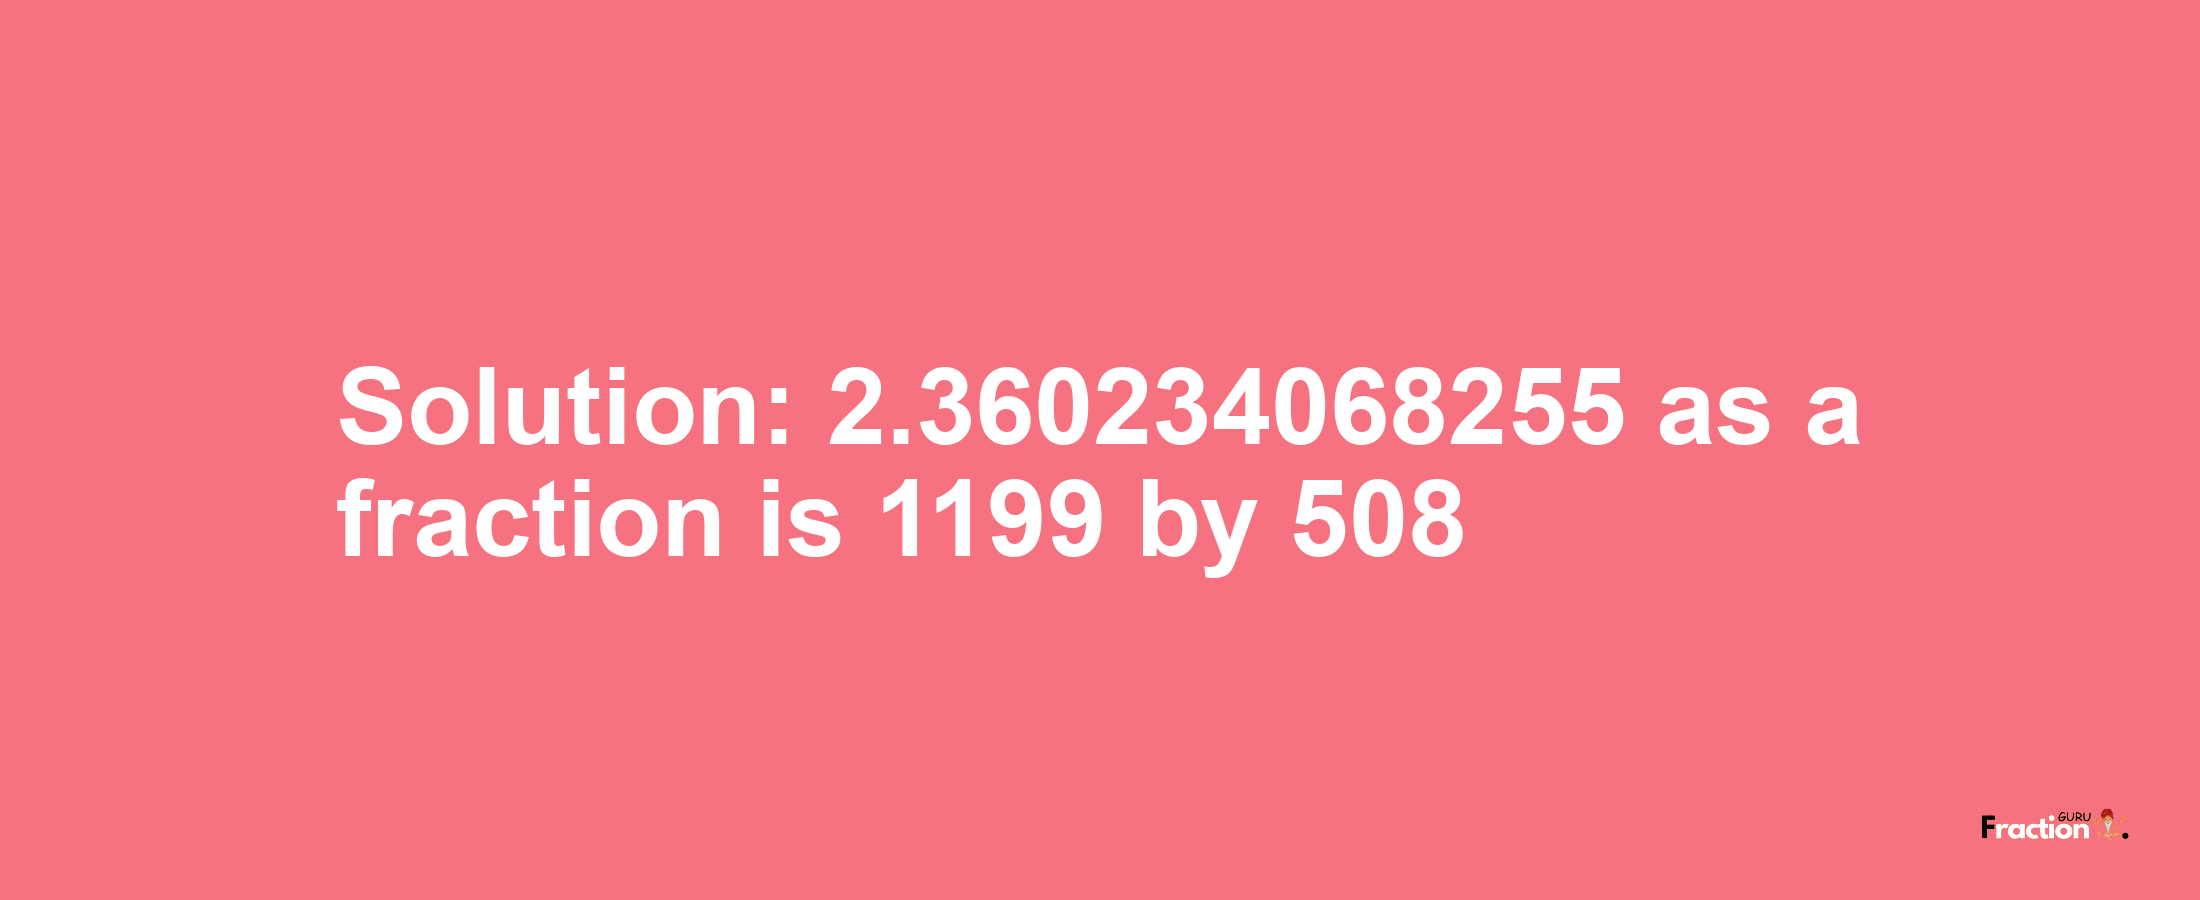 Solution:2.360234068255 as a fraction is 1199/508